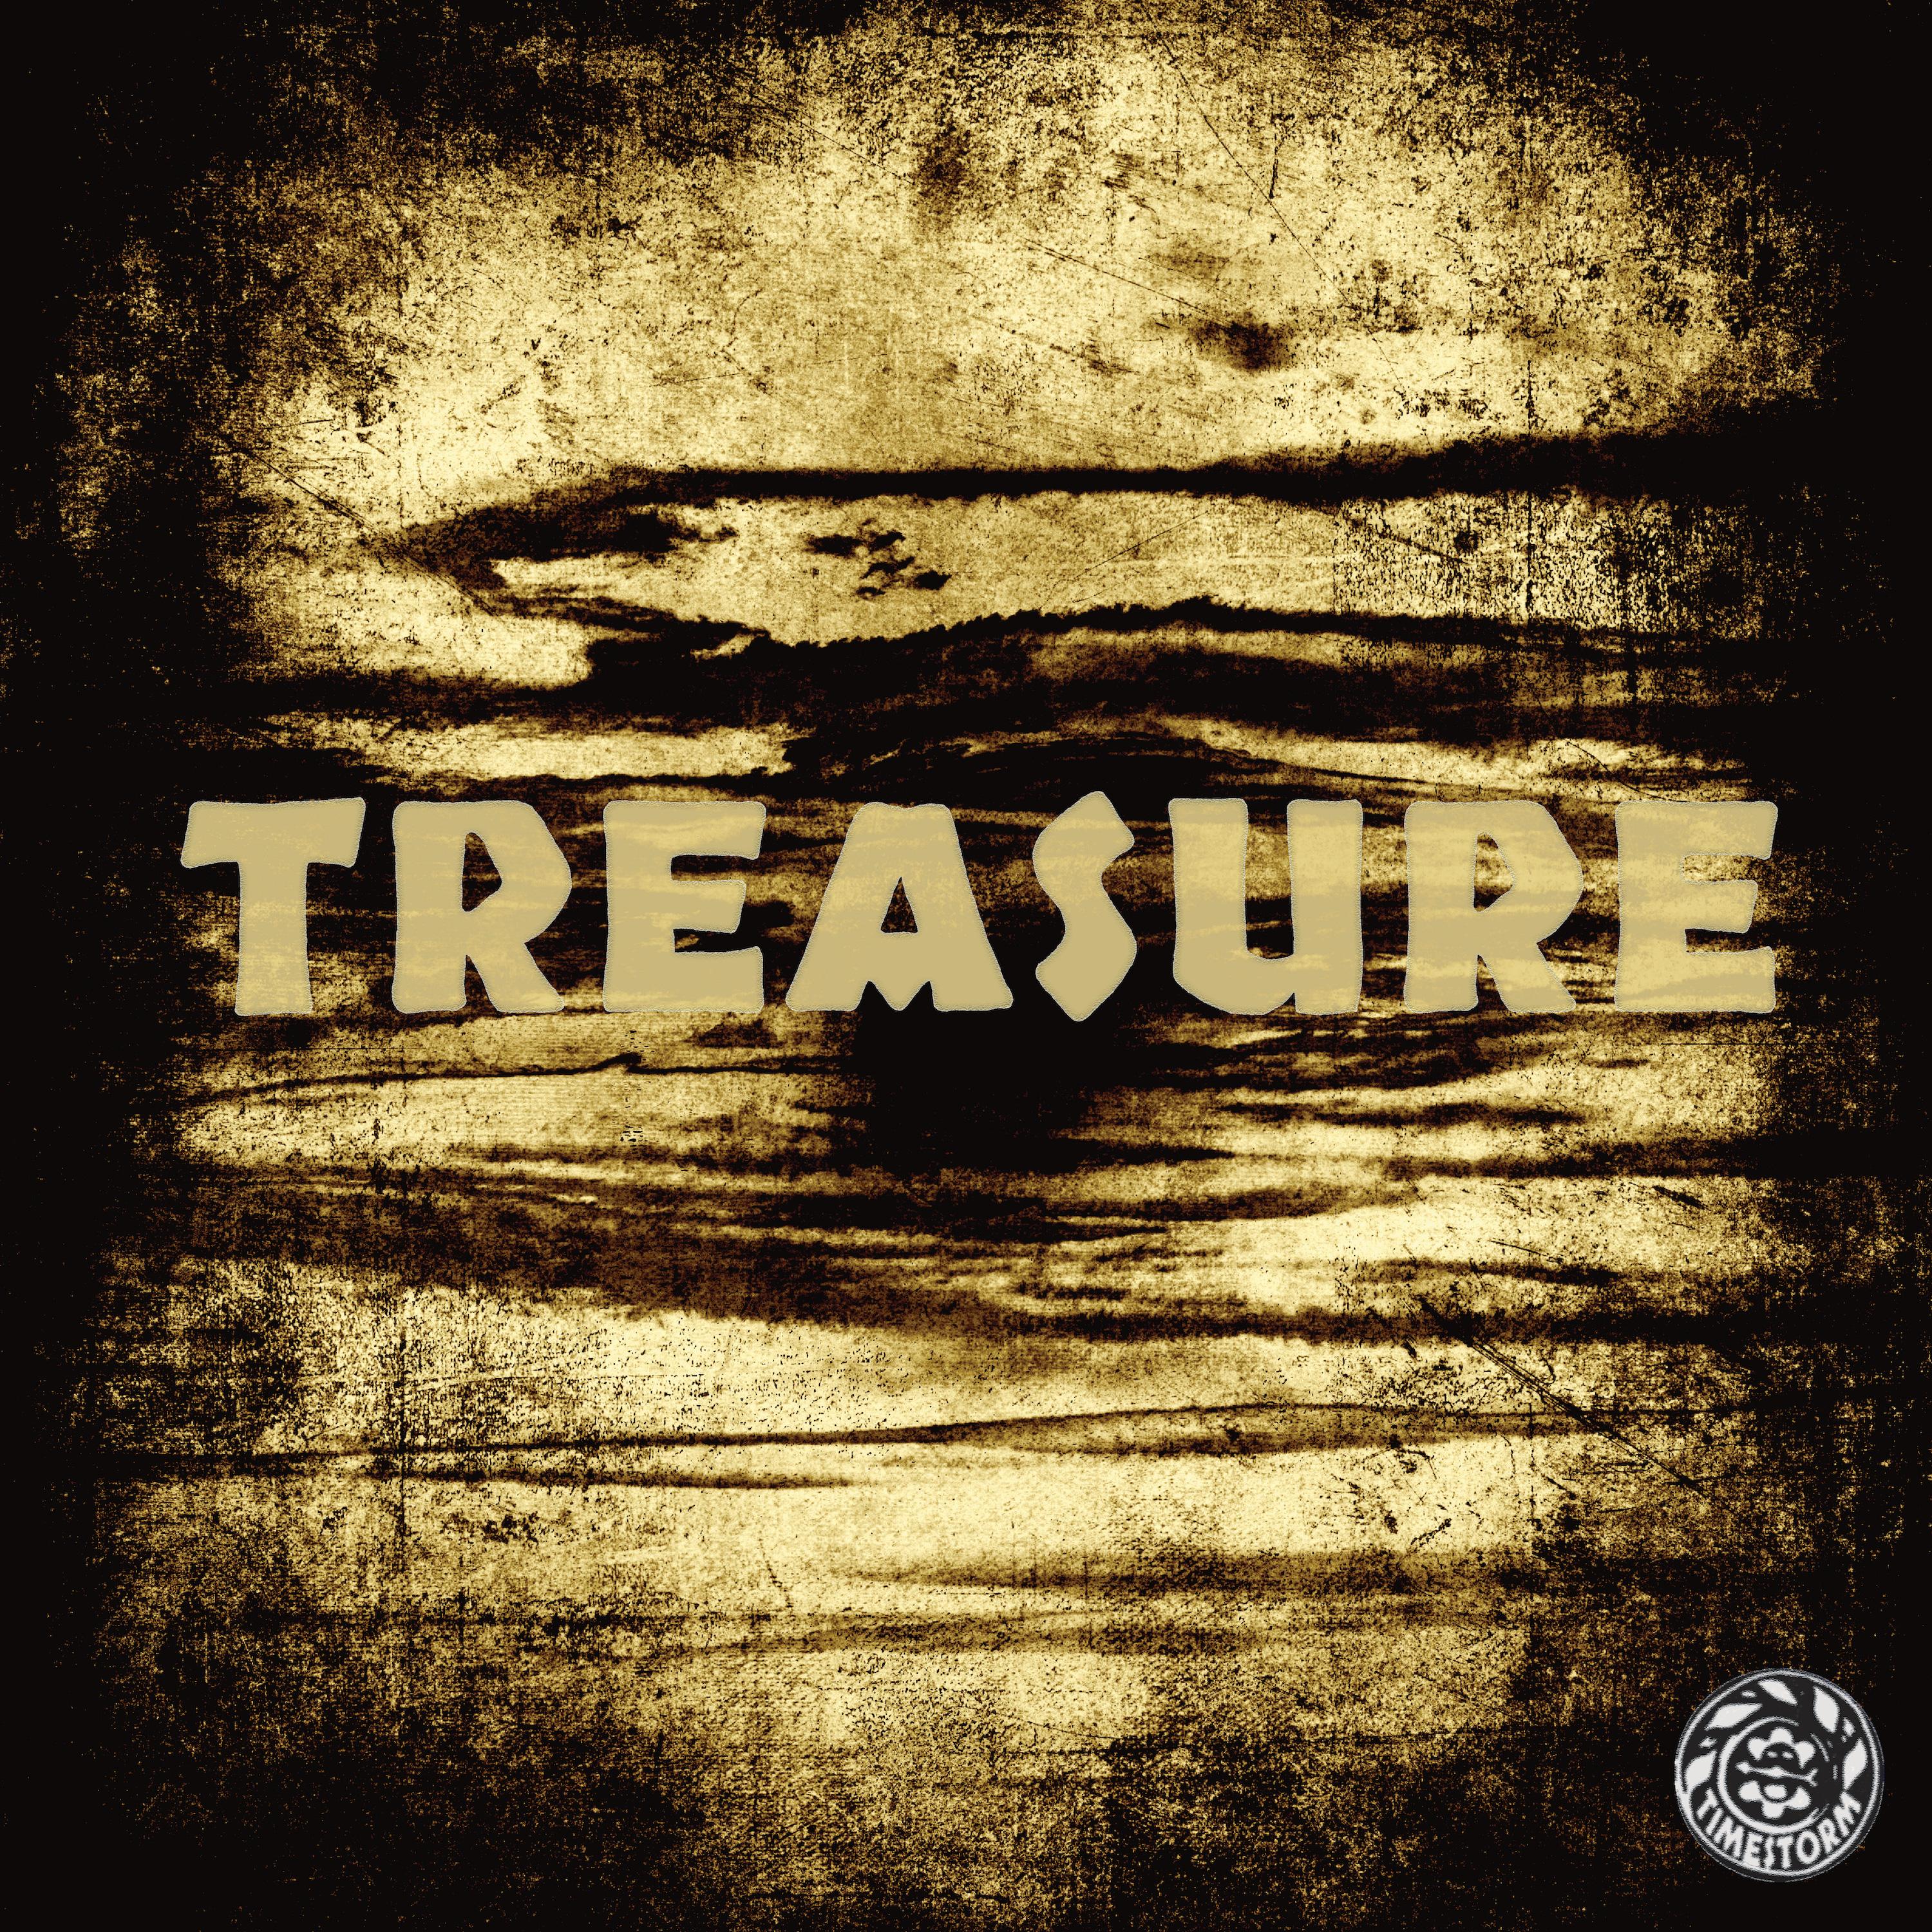 Thumbnail for "Special: Treasure".